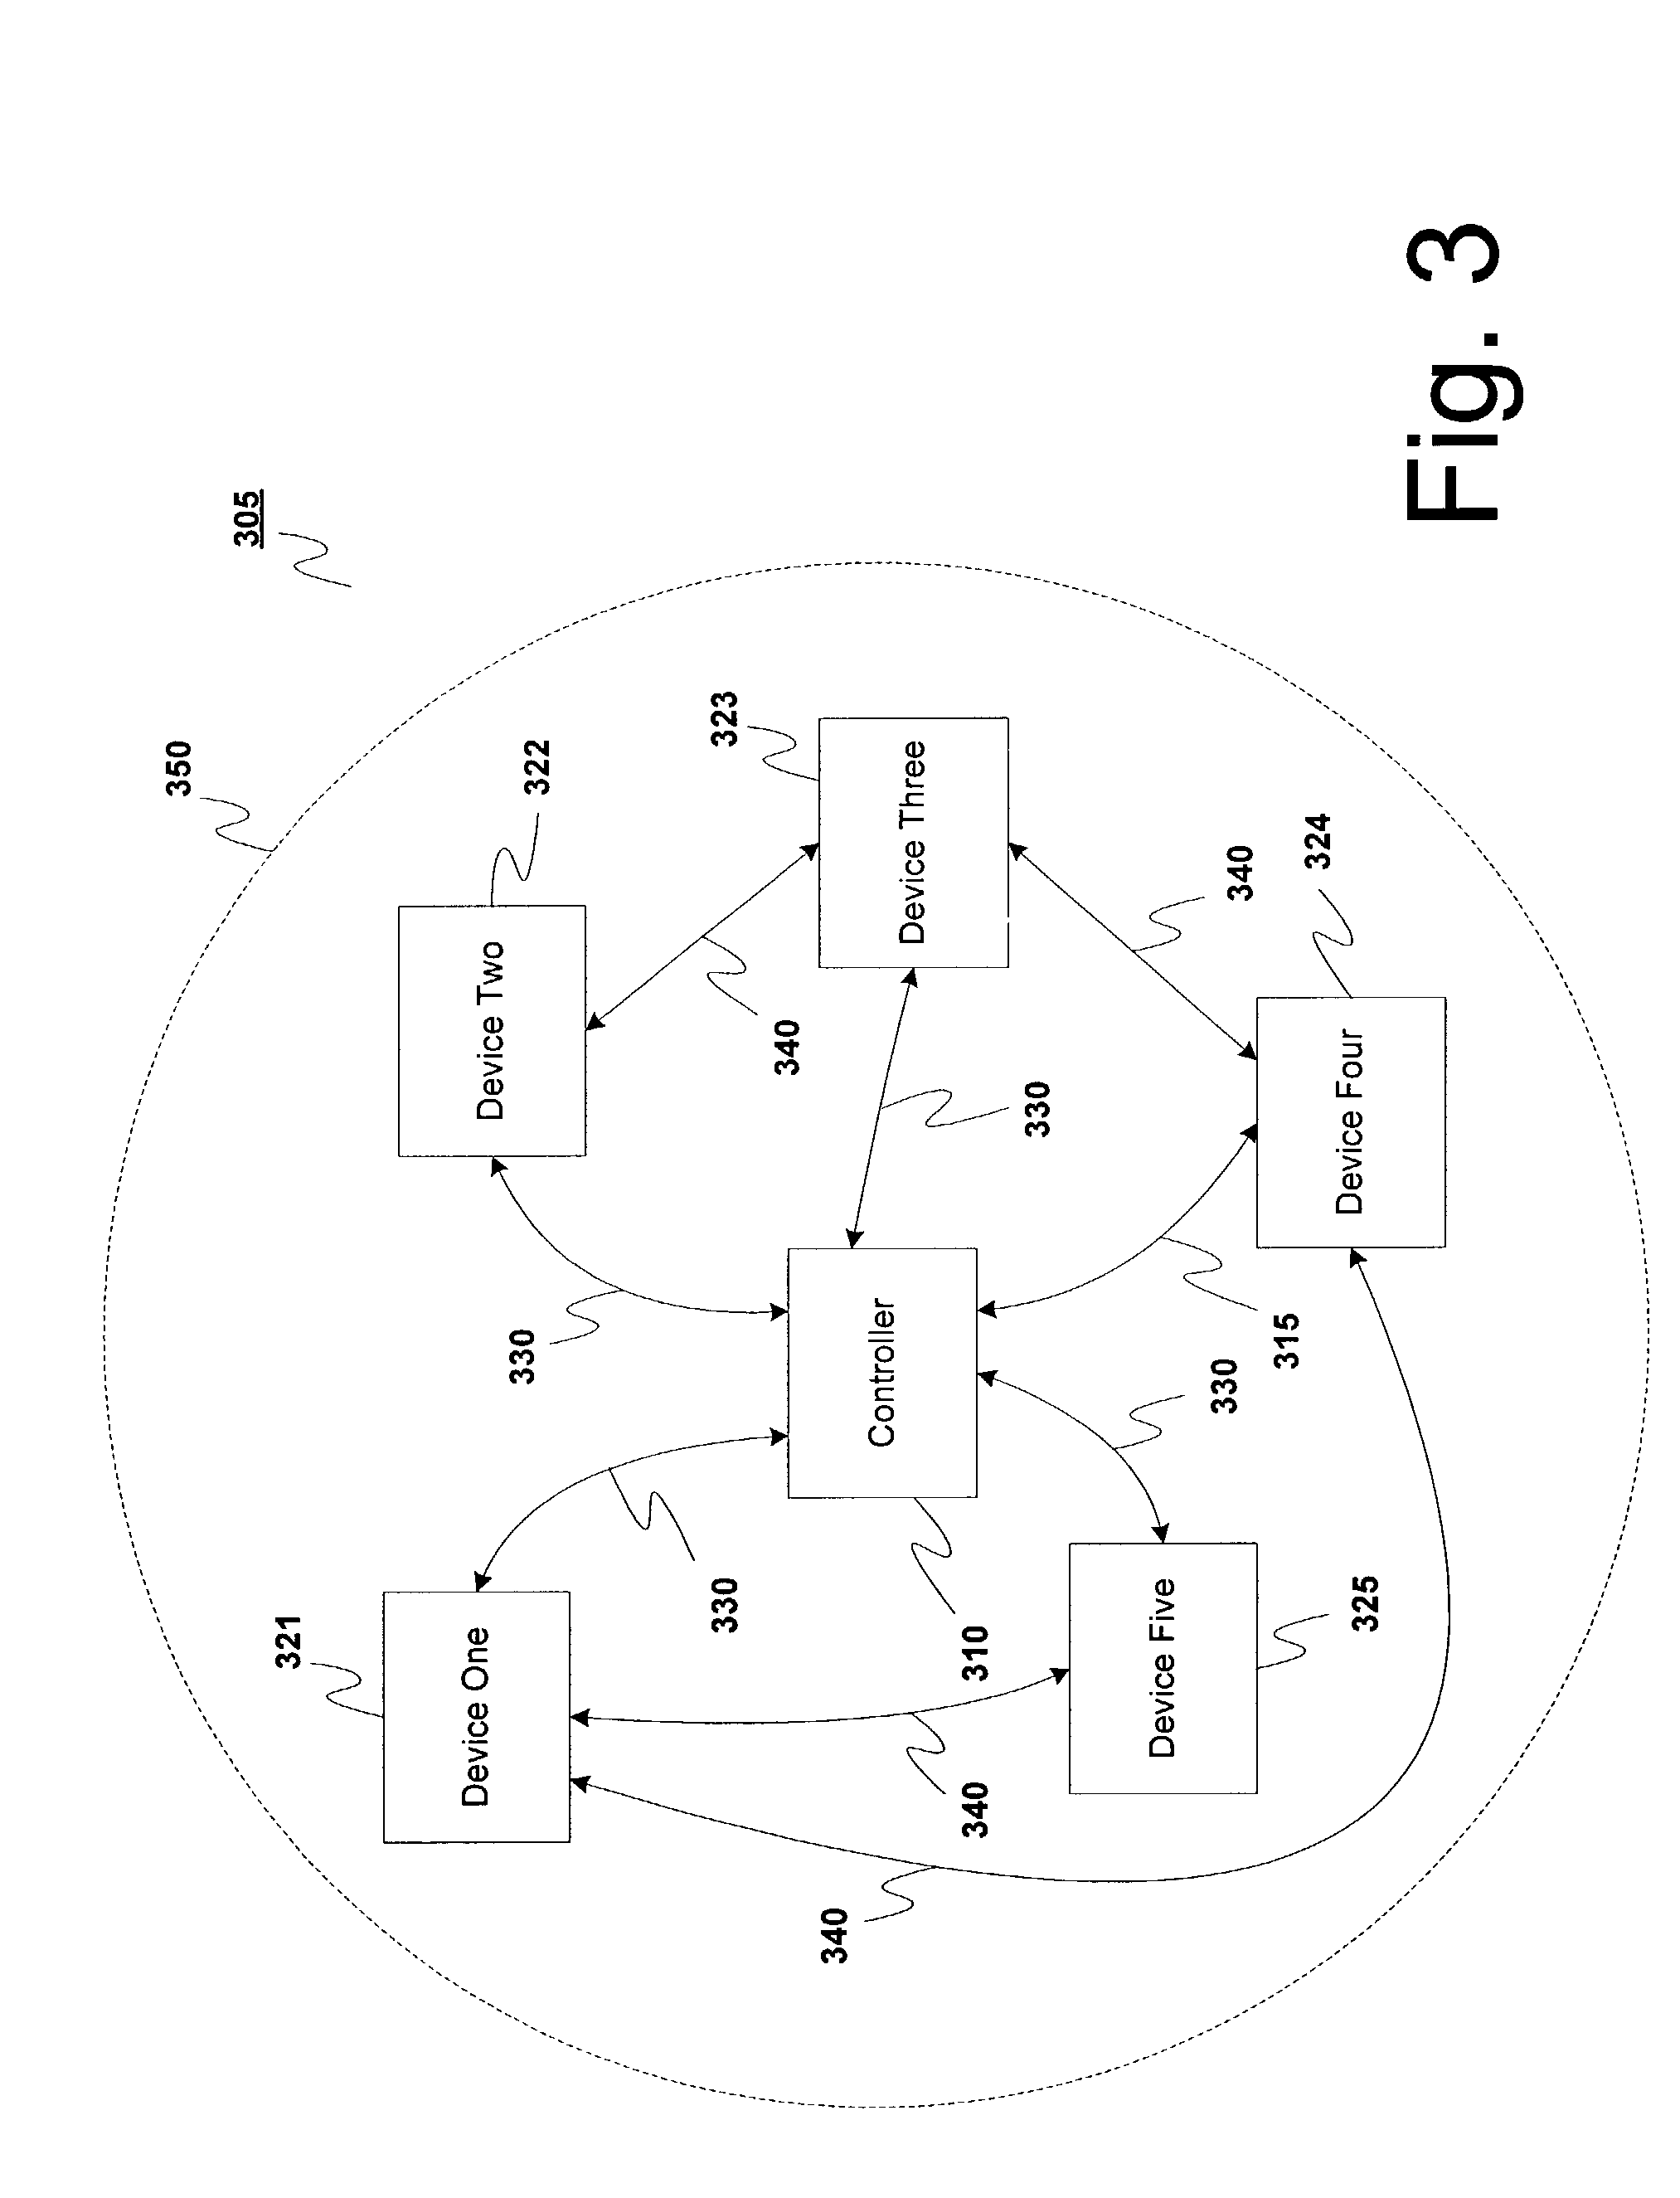 System and method of communication between multiple point-coordinated wireless networks